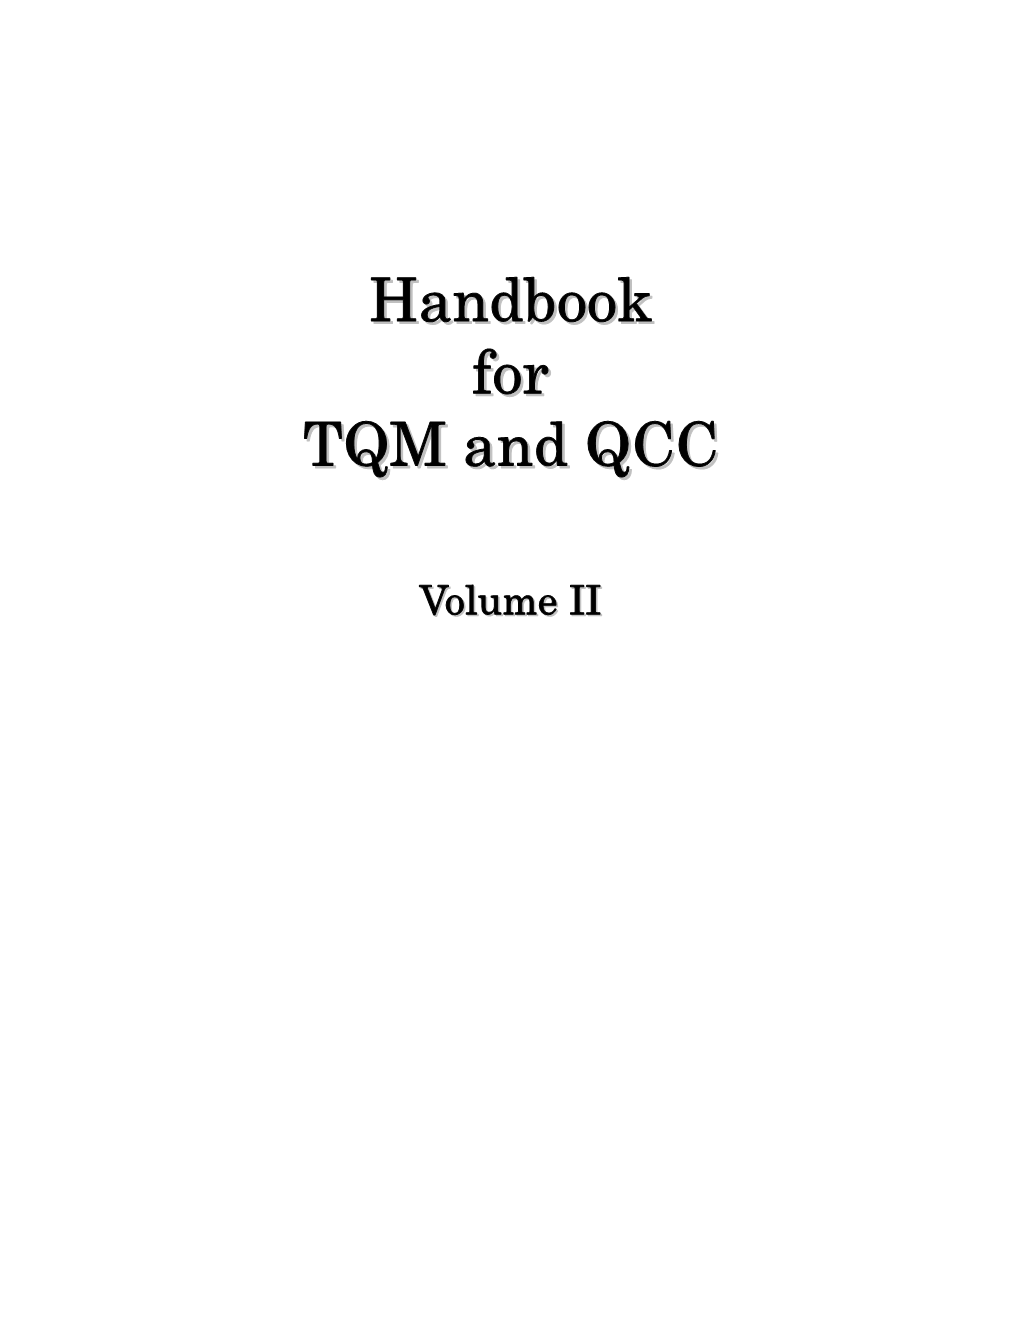 Handbook for TQM And